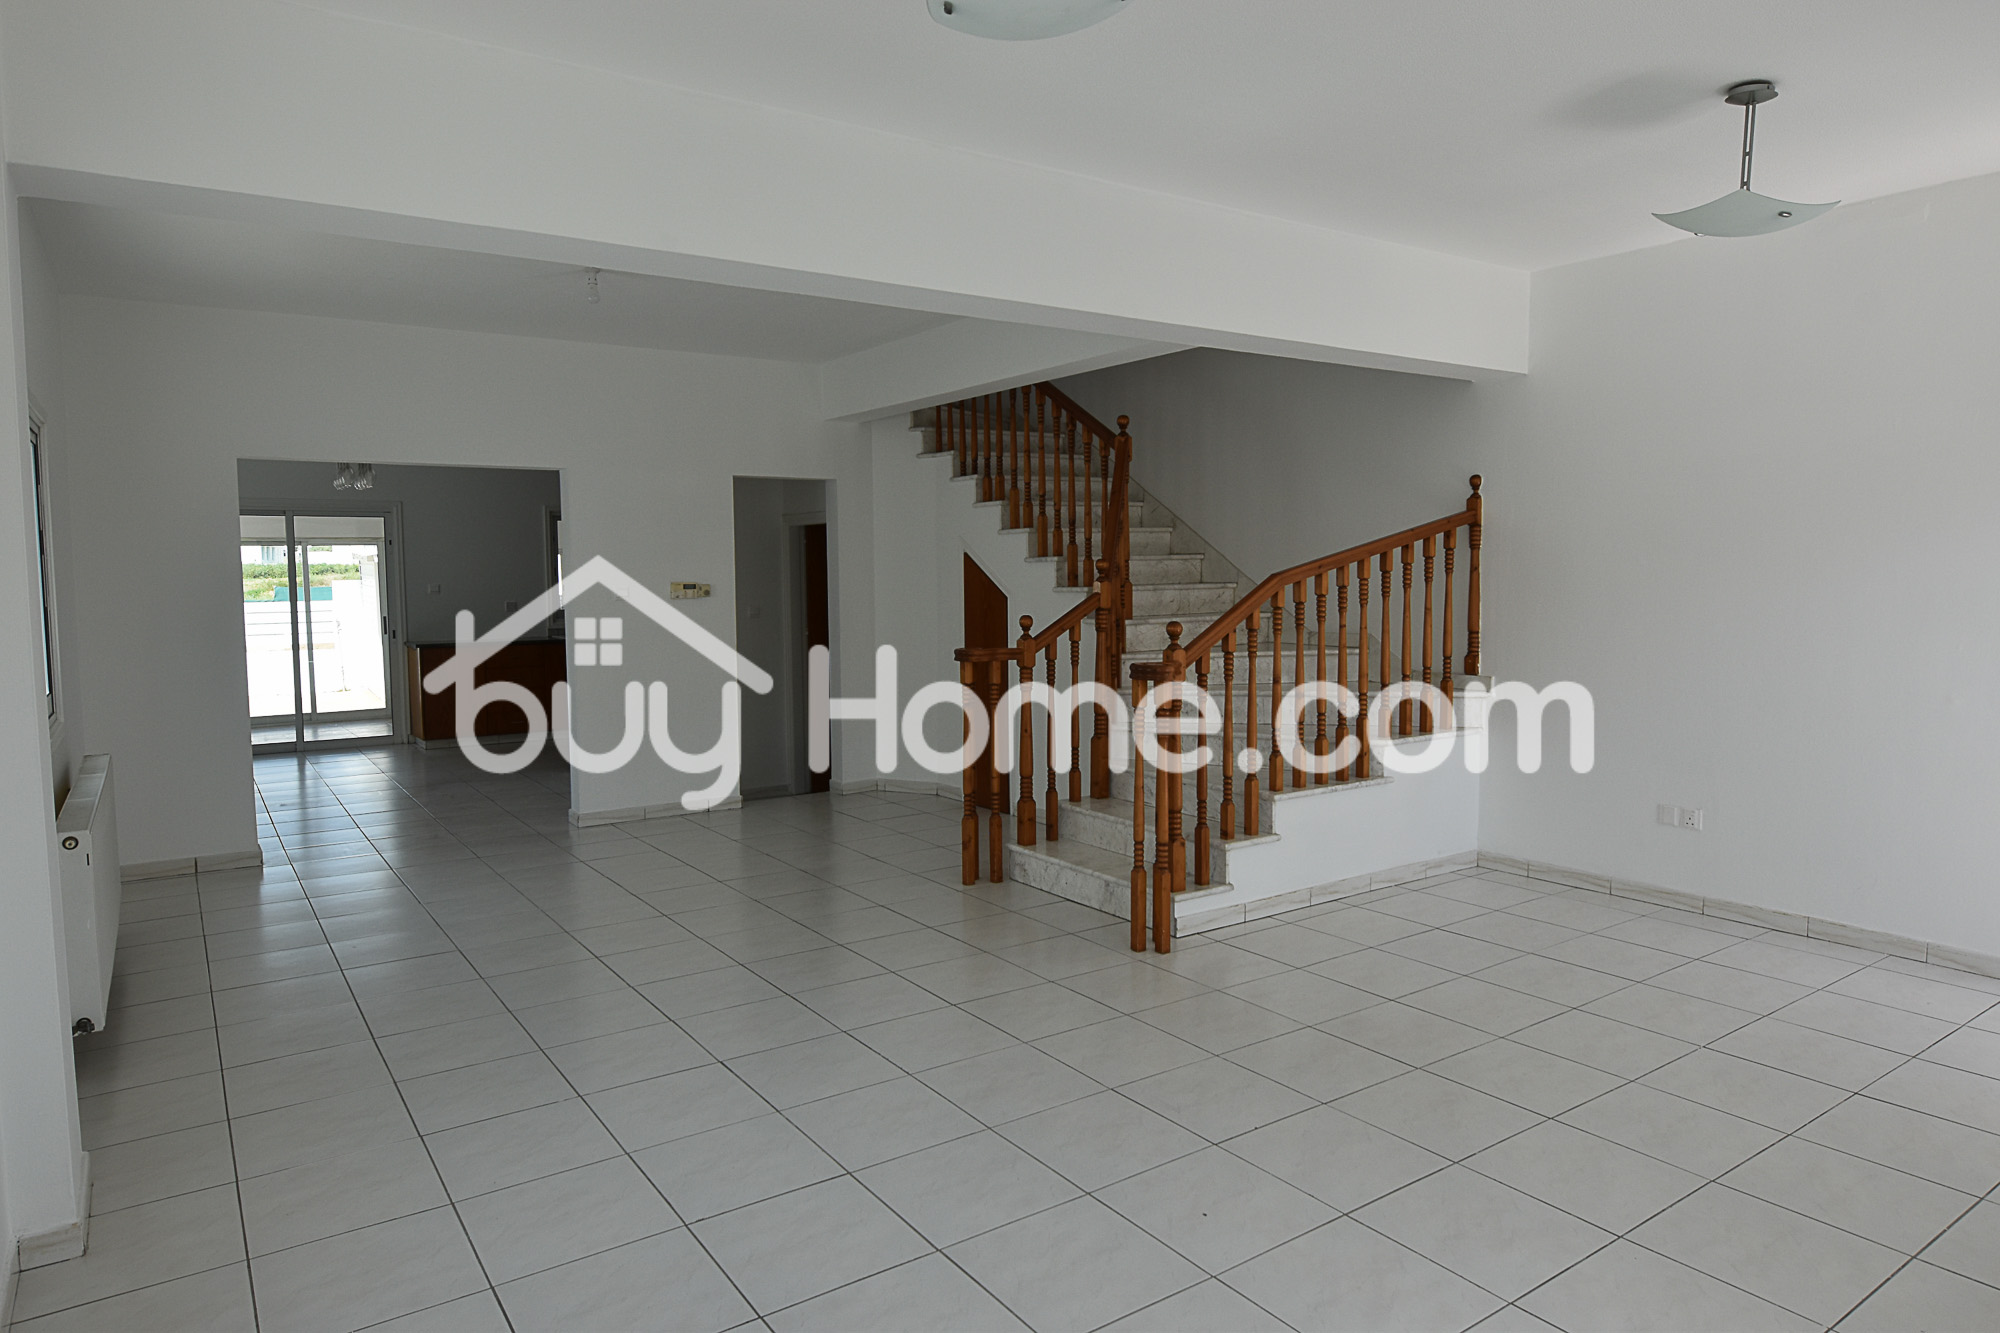 3 BDR house in Aradippou | BuyHome